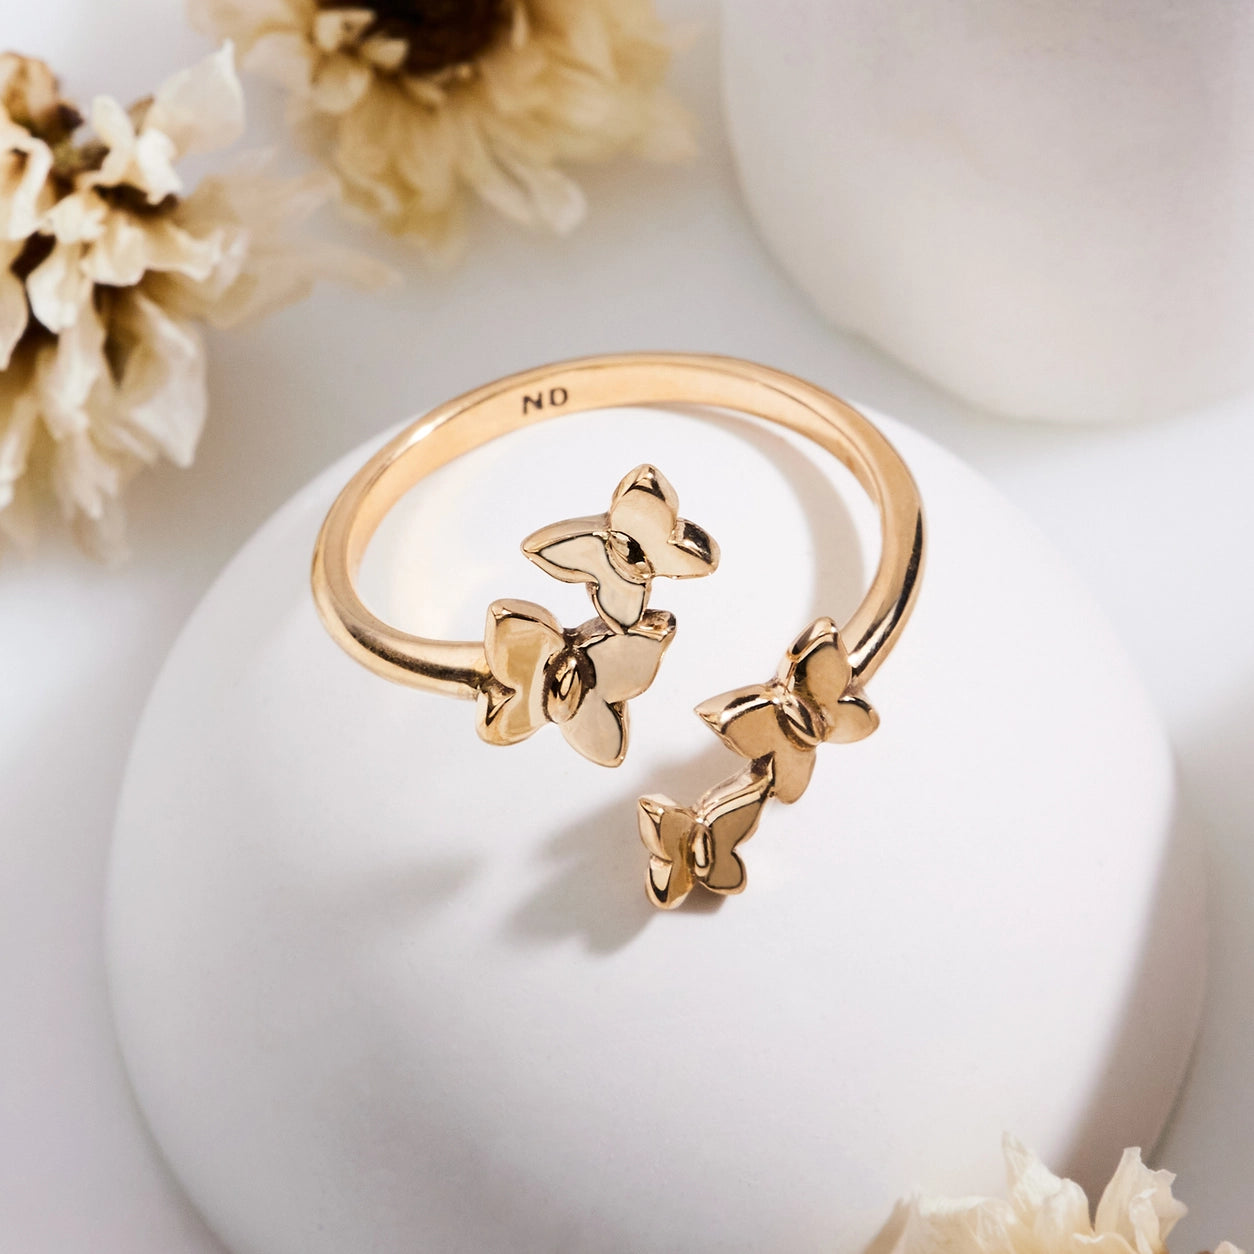 Bronze ring butterfly swarm